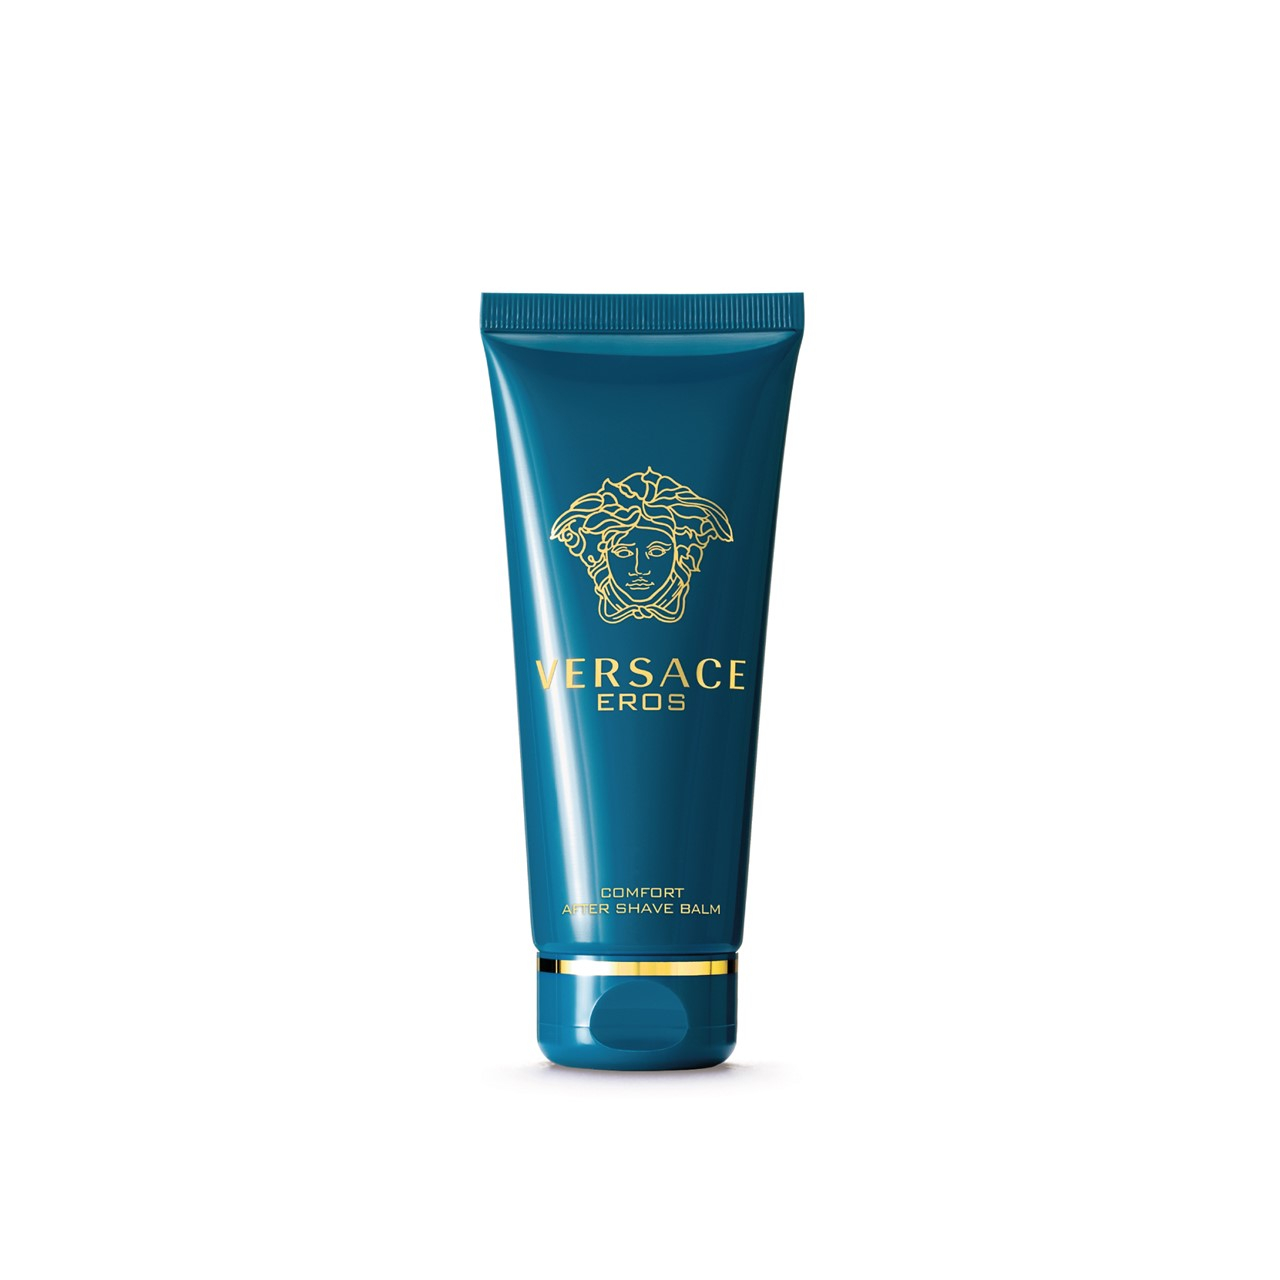 Versace Eros After Shave Balm 100ml